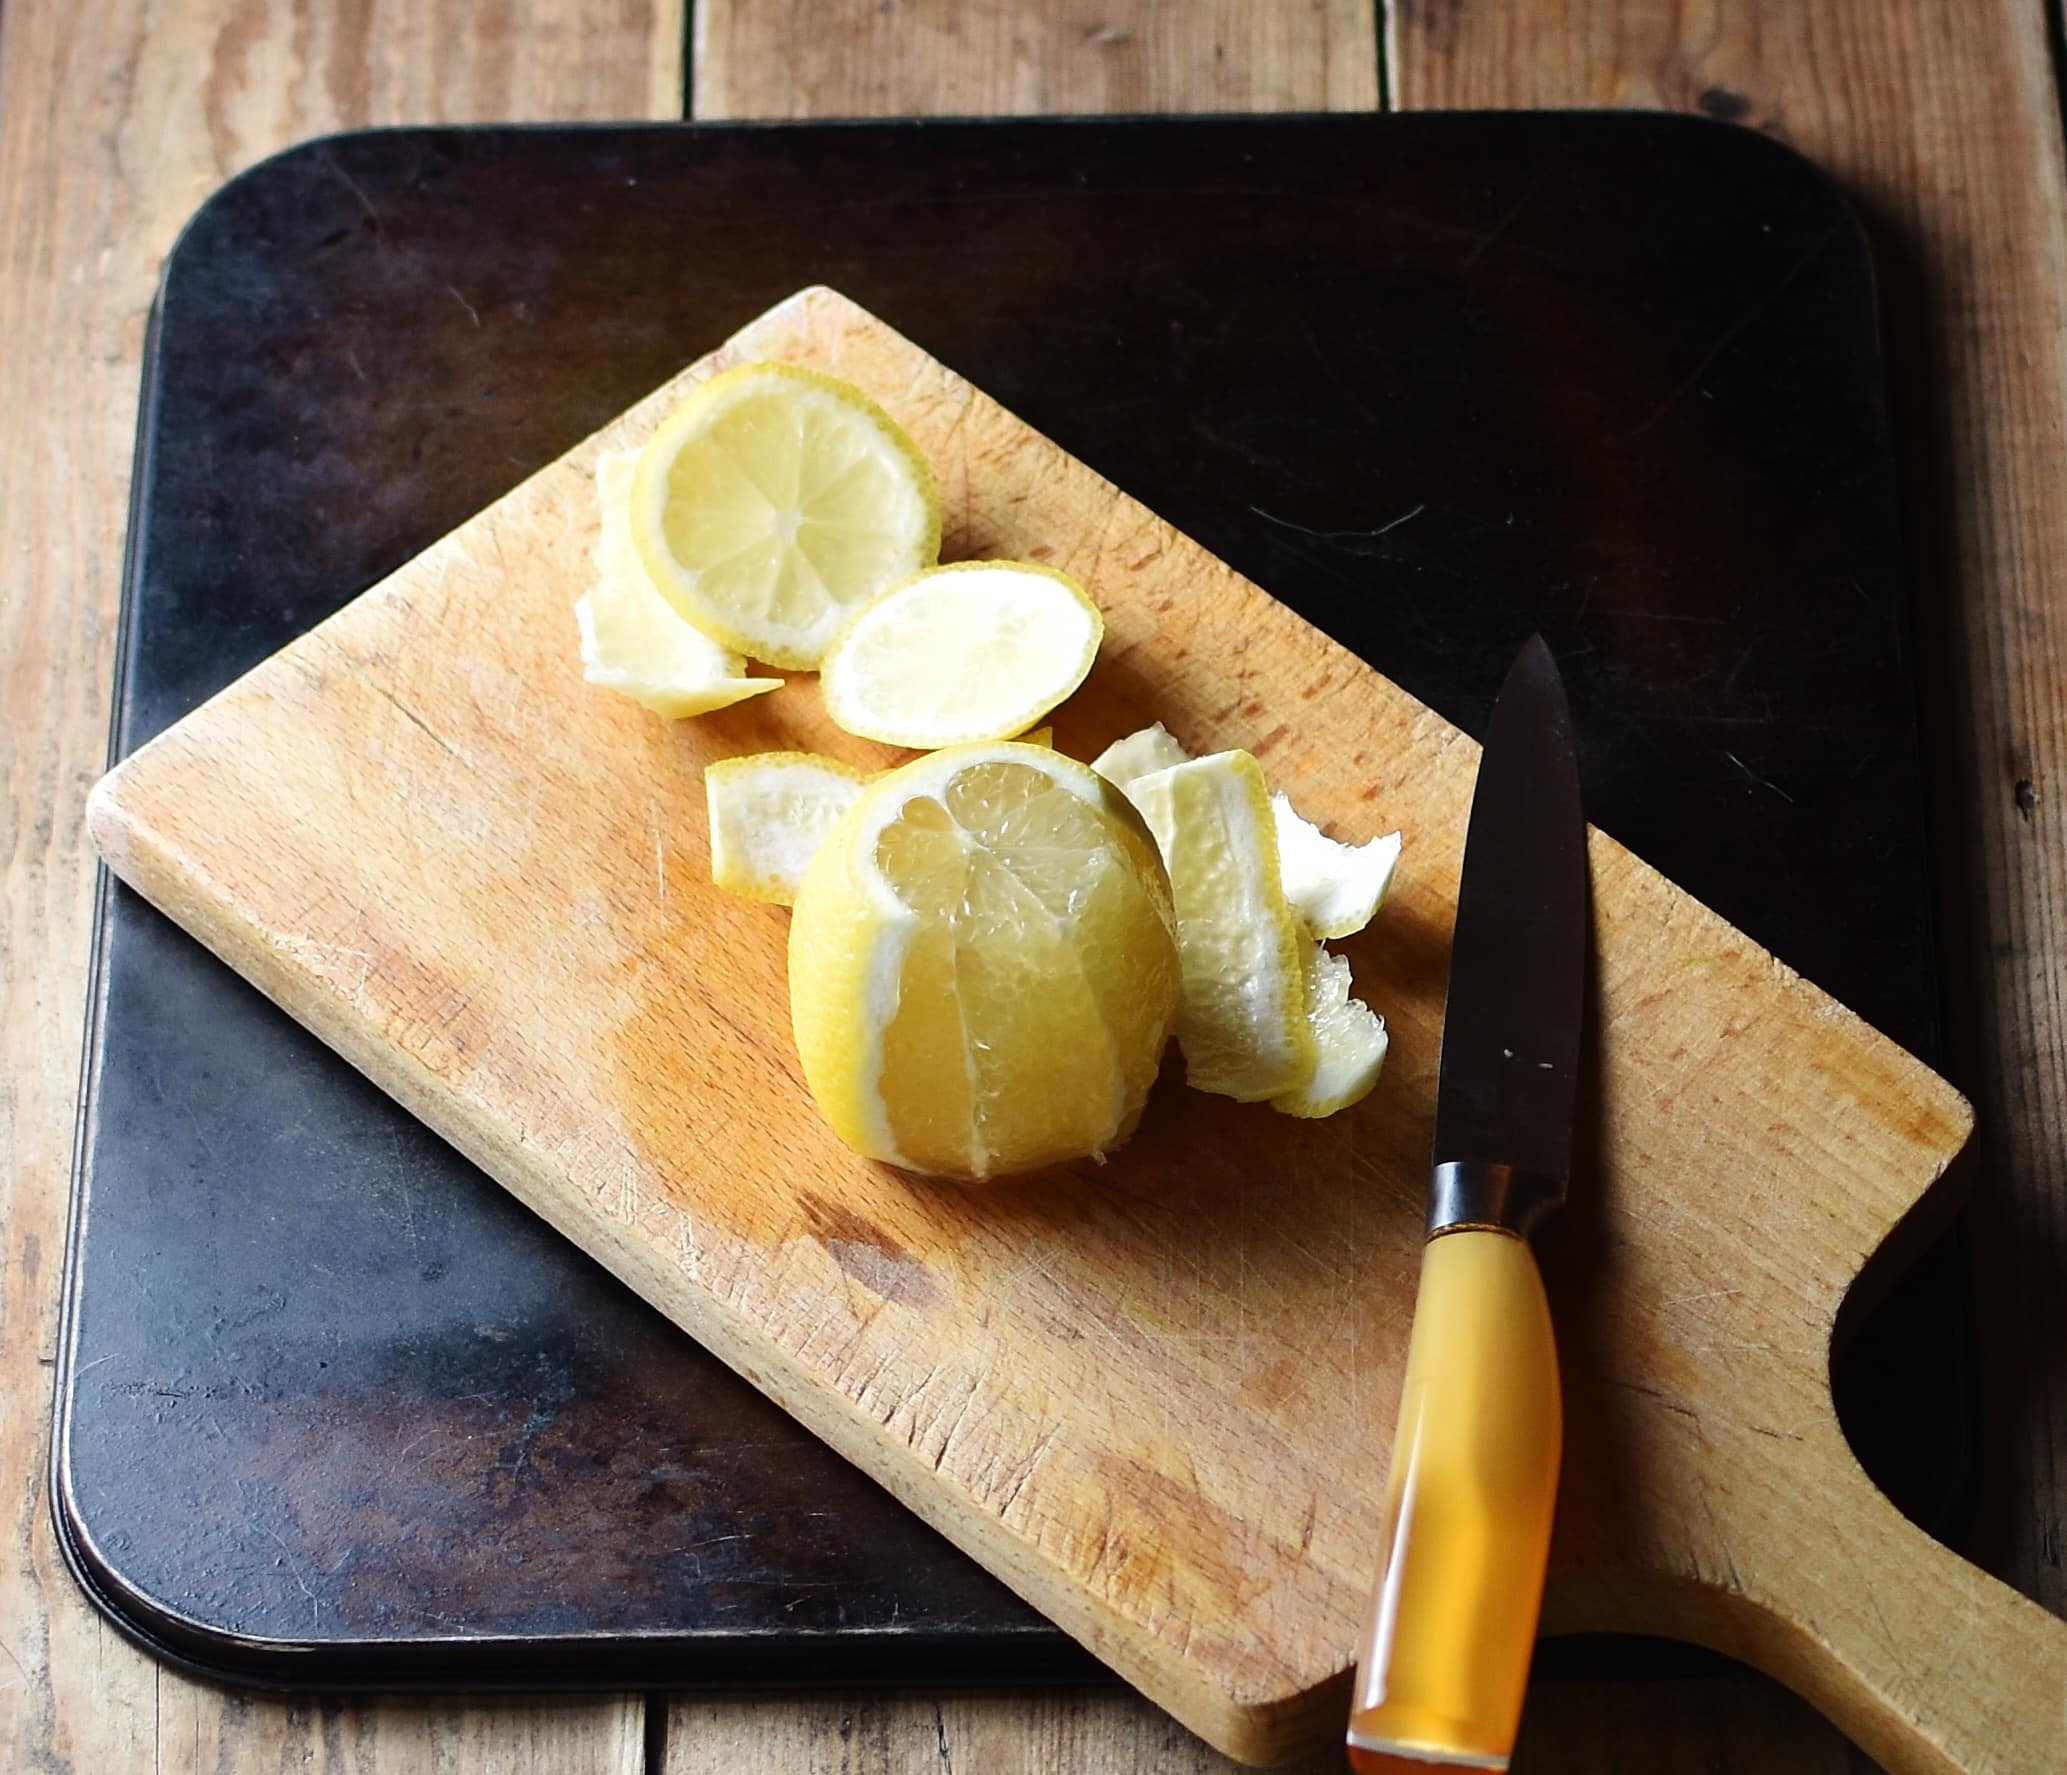 Lemon and peel with knife on top of cutting board.